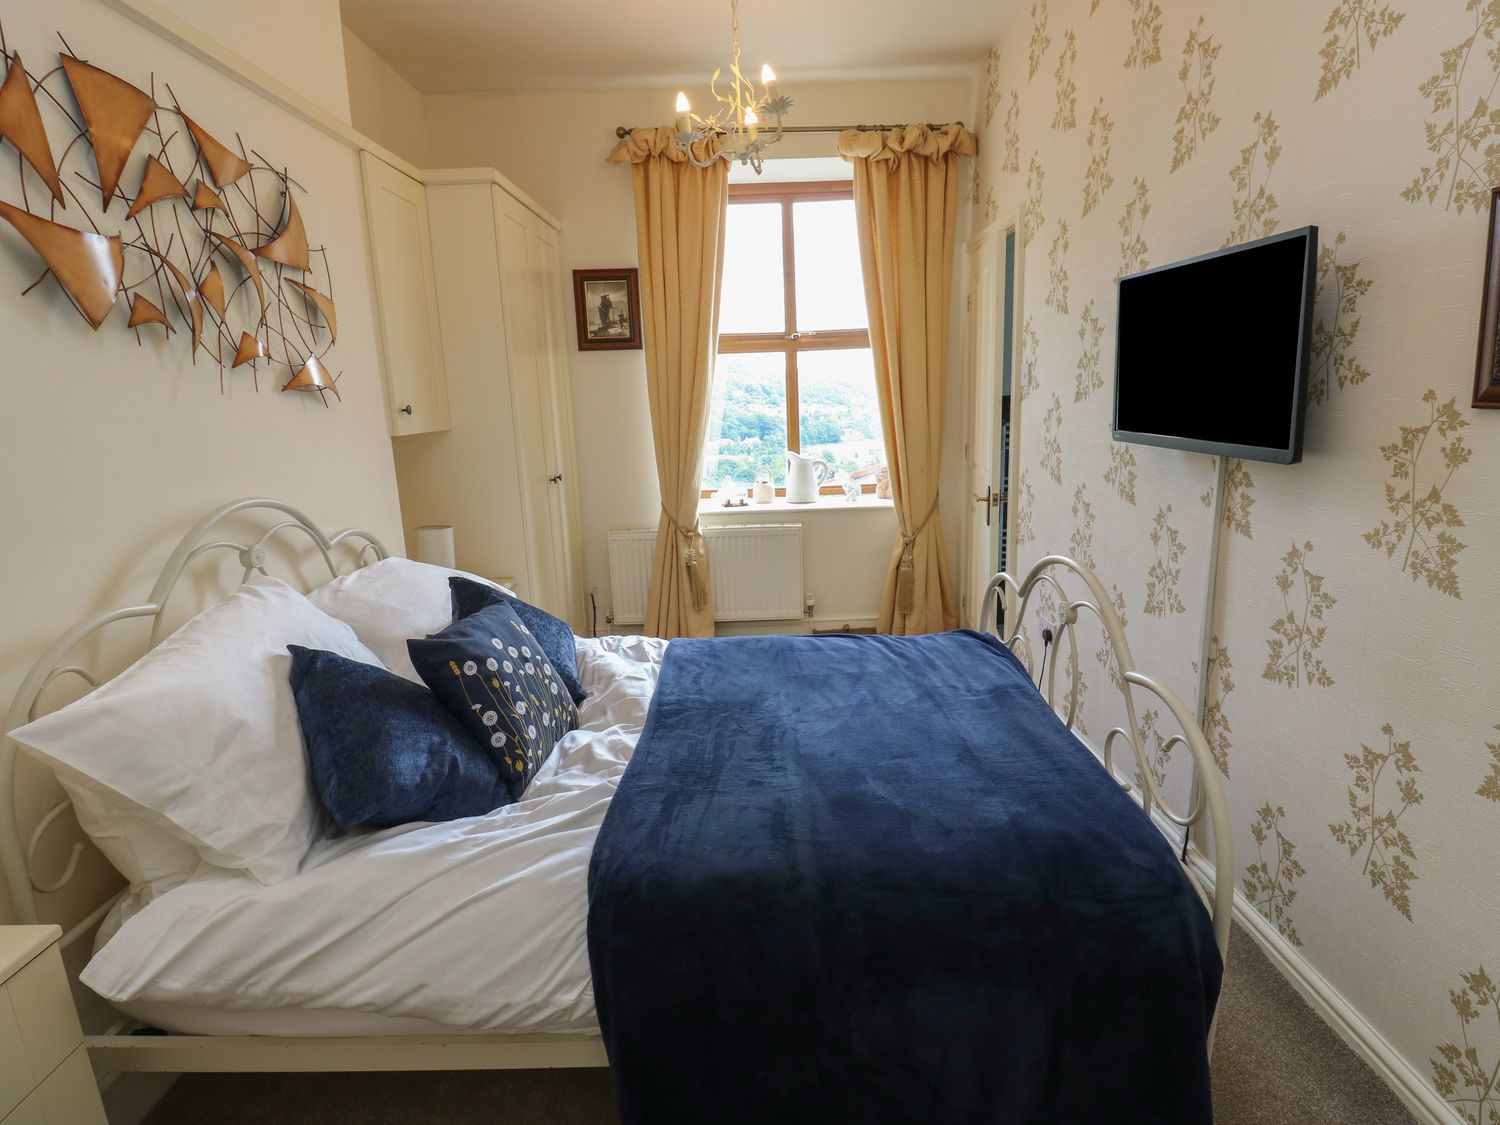 Lee House Farm, Halifax, Yorkshire. Bedrooms with en-suites. Countryside views. Near a National Park